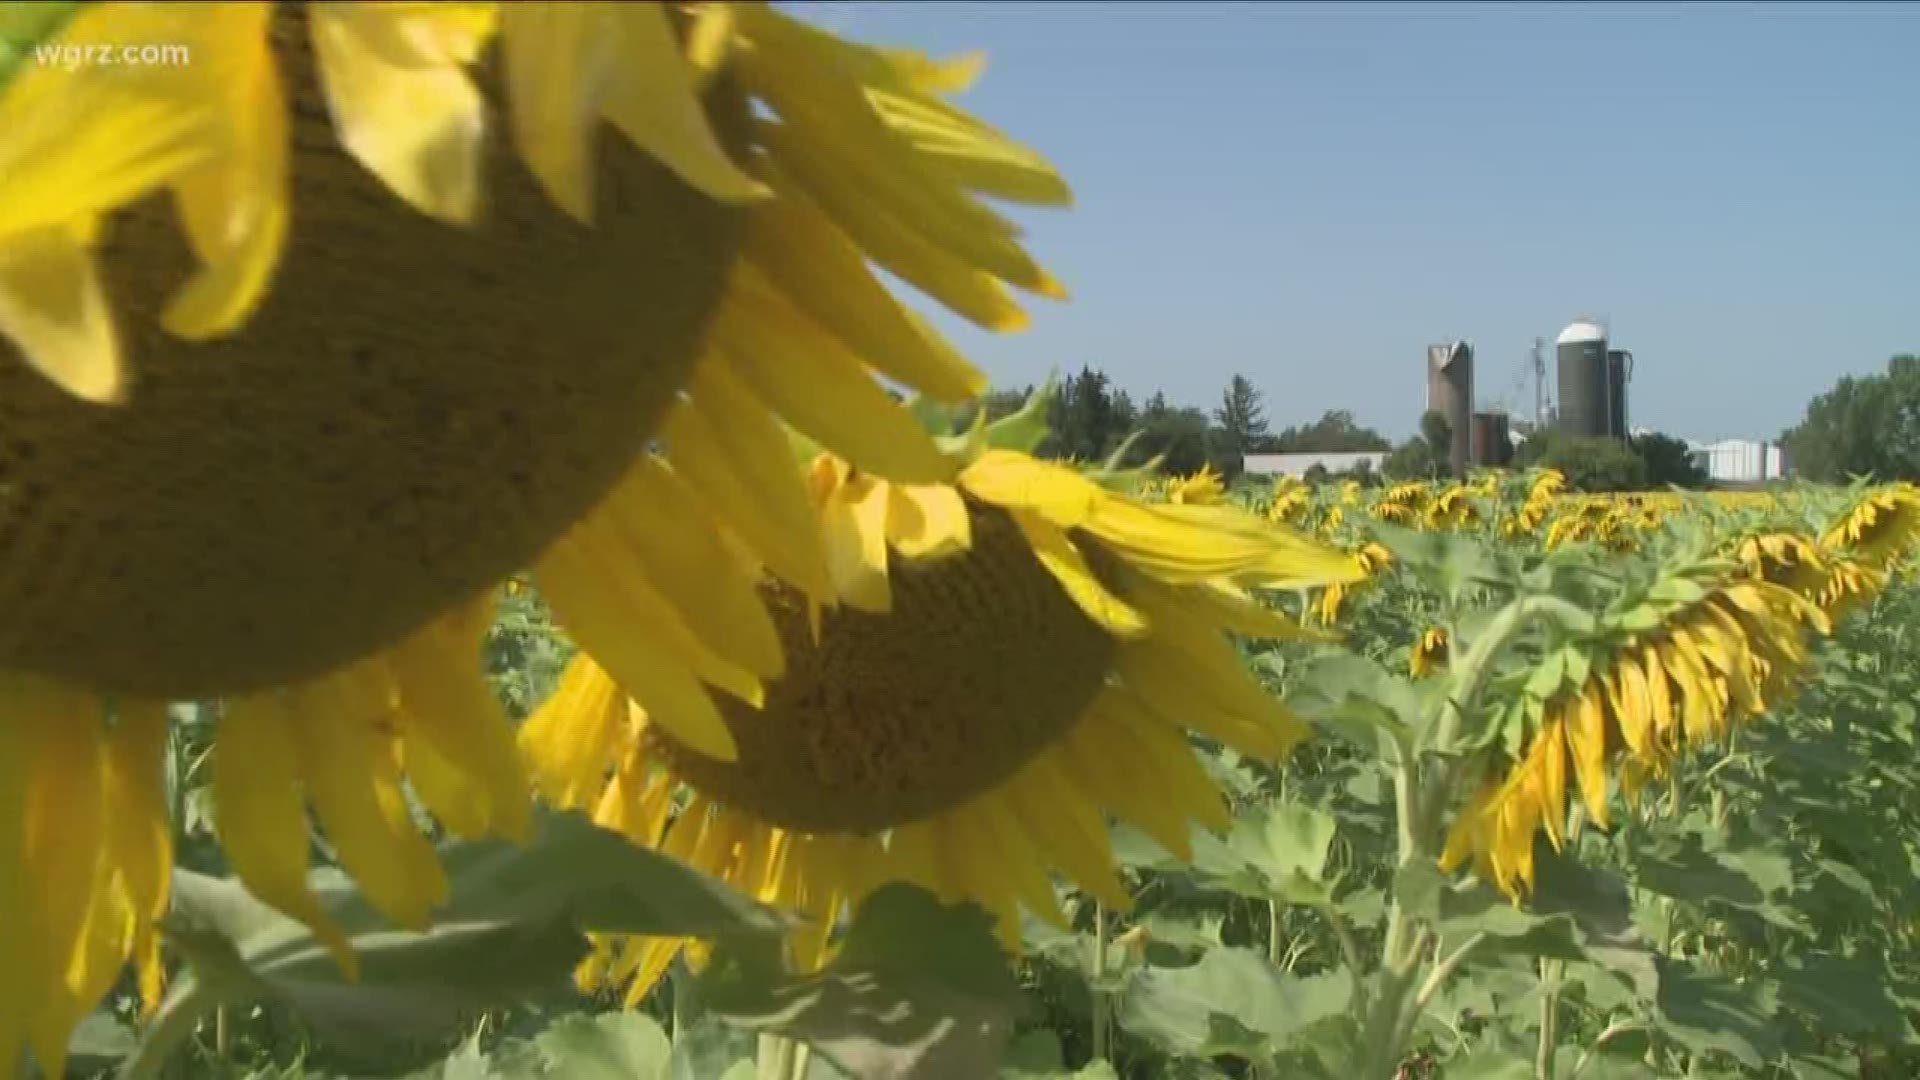 bring your family out, go roam among the sunflowers.